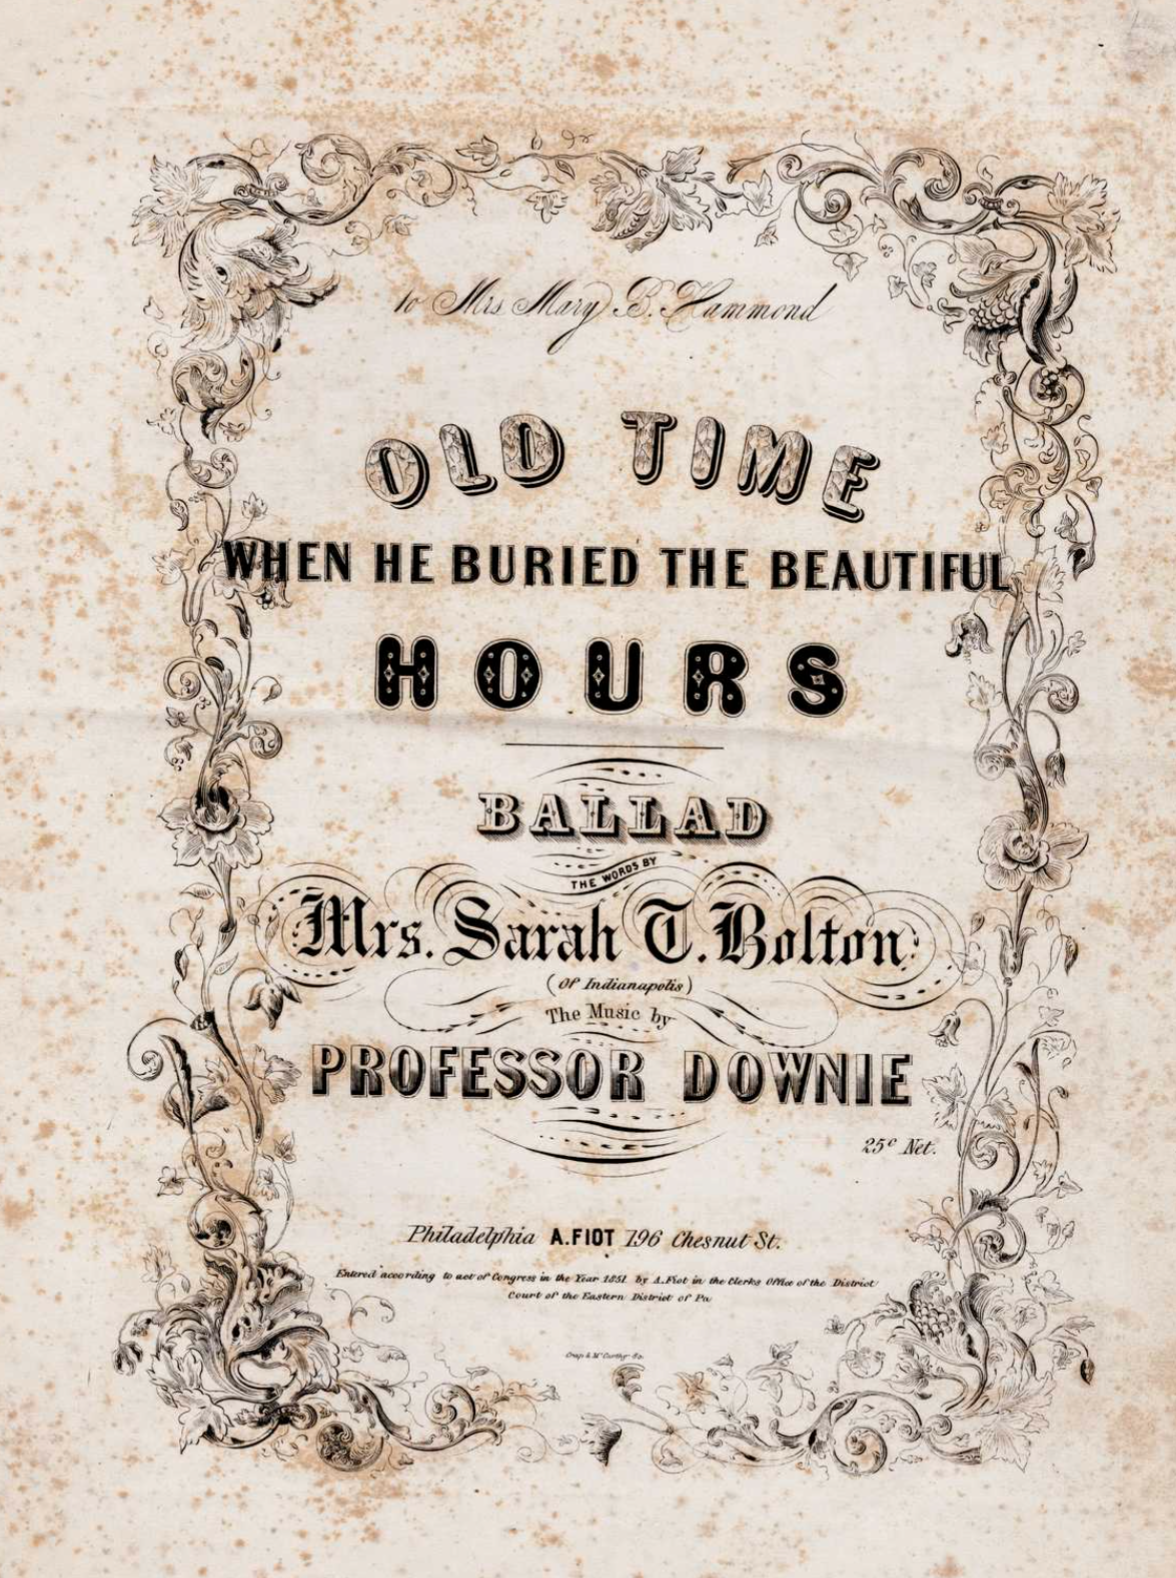 An old sheet music cover reads "To Mrs Mary B. Hammond Old Time When He Buried the Beautiful Hours, the words by Mrs. Sarah T. Bolton (of Indianapolis) the music by Professor Downie, ca. 1851" and is outlined in decorative scrollwork.